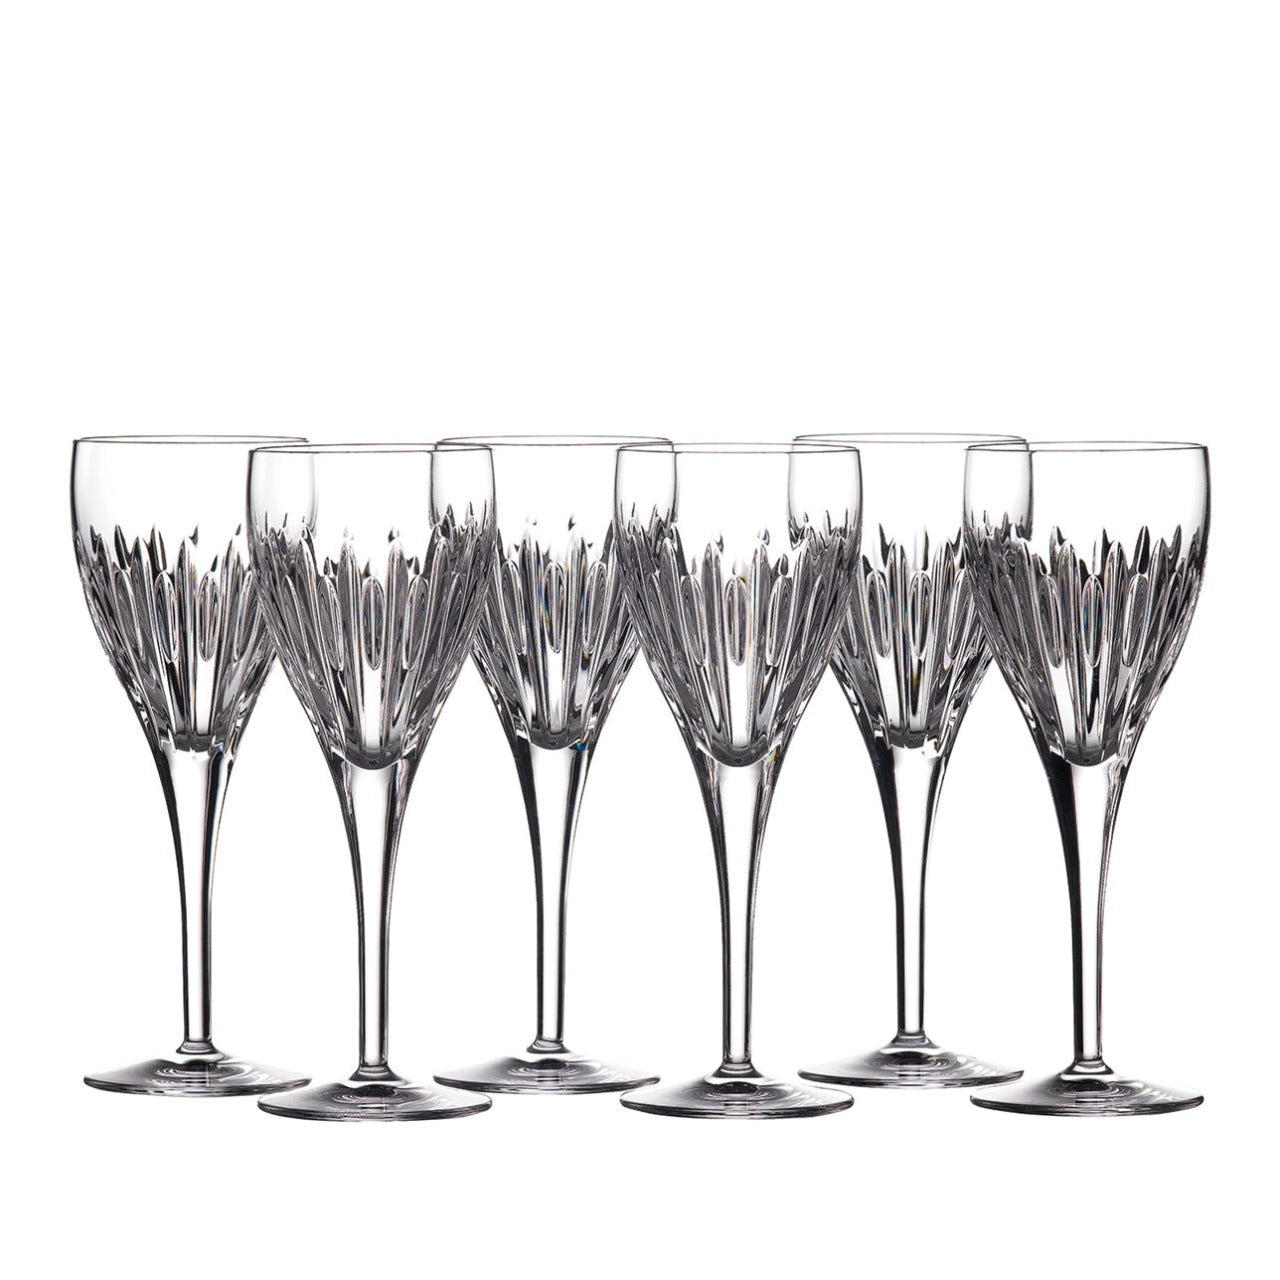 Waterford Crystal Ardan Collection Mara Wine Glass Set of 6  Whether the wine is a select vintage or just a favourite everyday choice, it always feels special when served in a Waterford glass. The set of six Mara wine glasses provide the perfect modern design, created by Waterford to reflect the brilliance and sparkle it is renowned for but with a contemporary shape and simple, versatile pattern. 